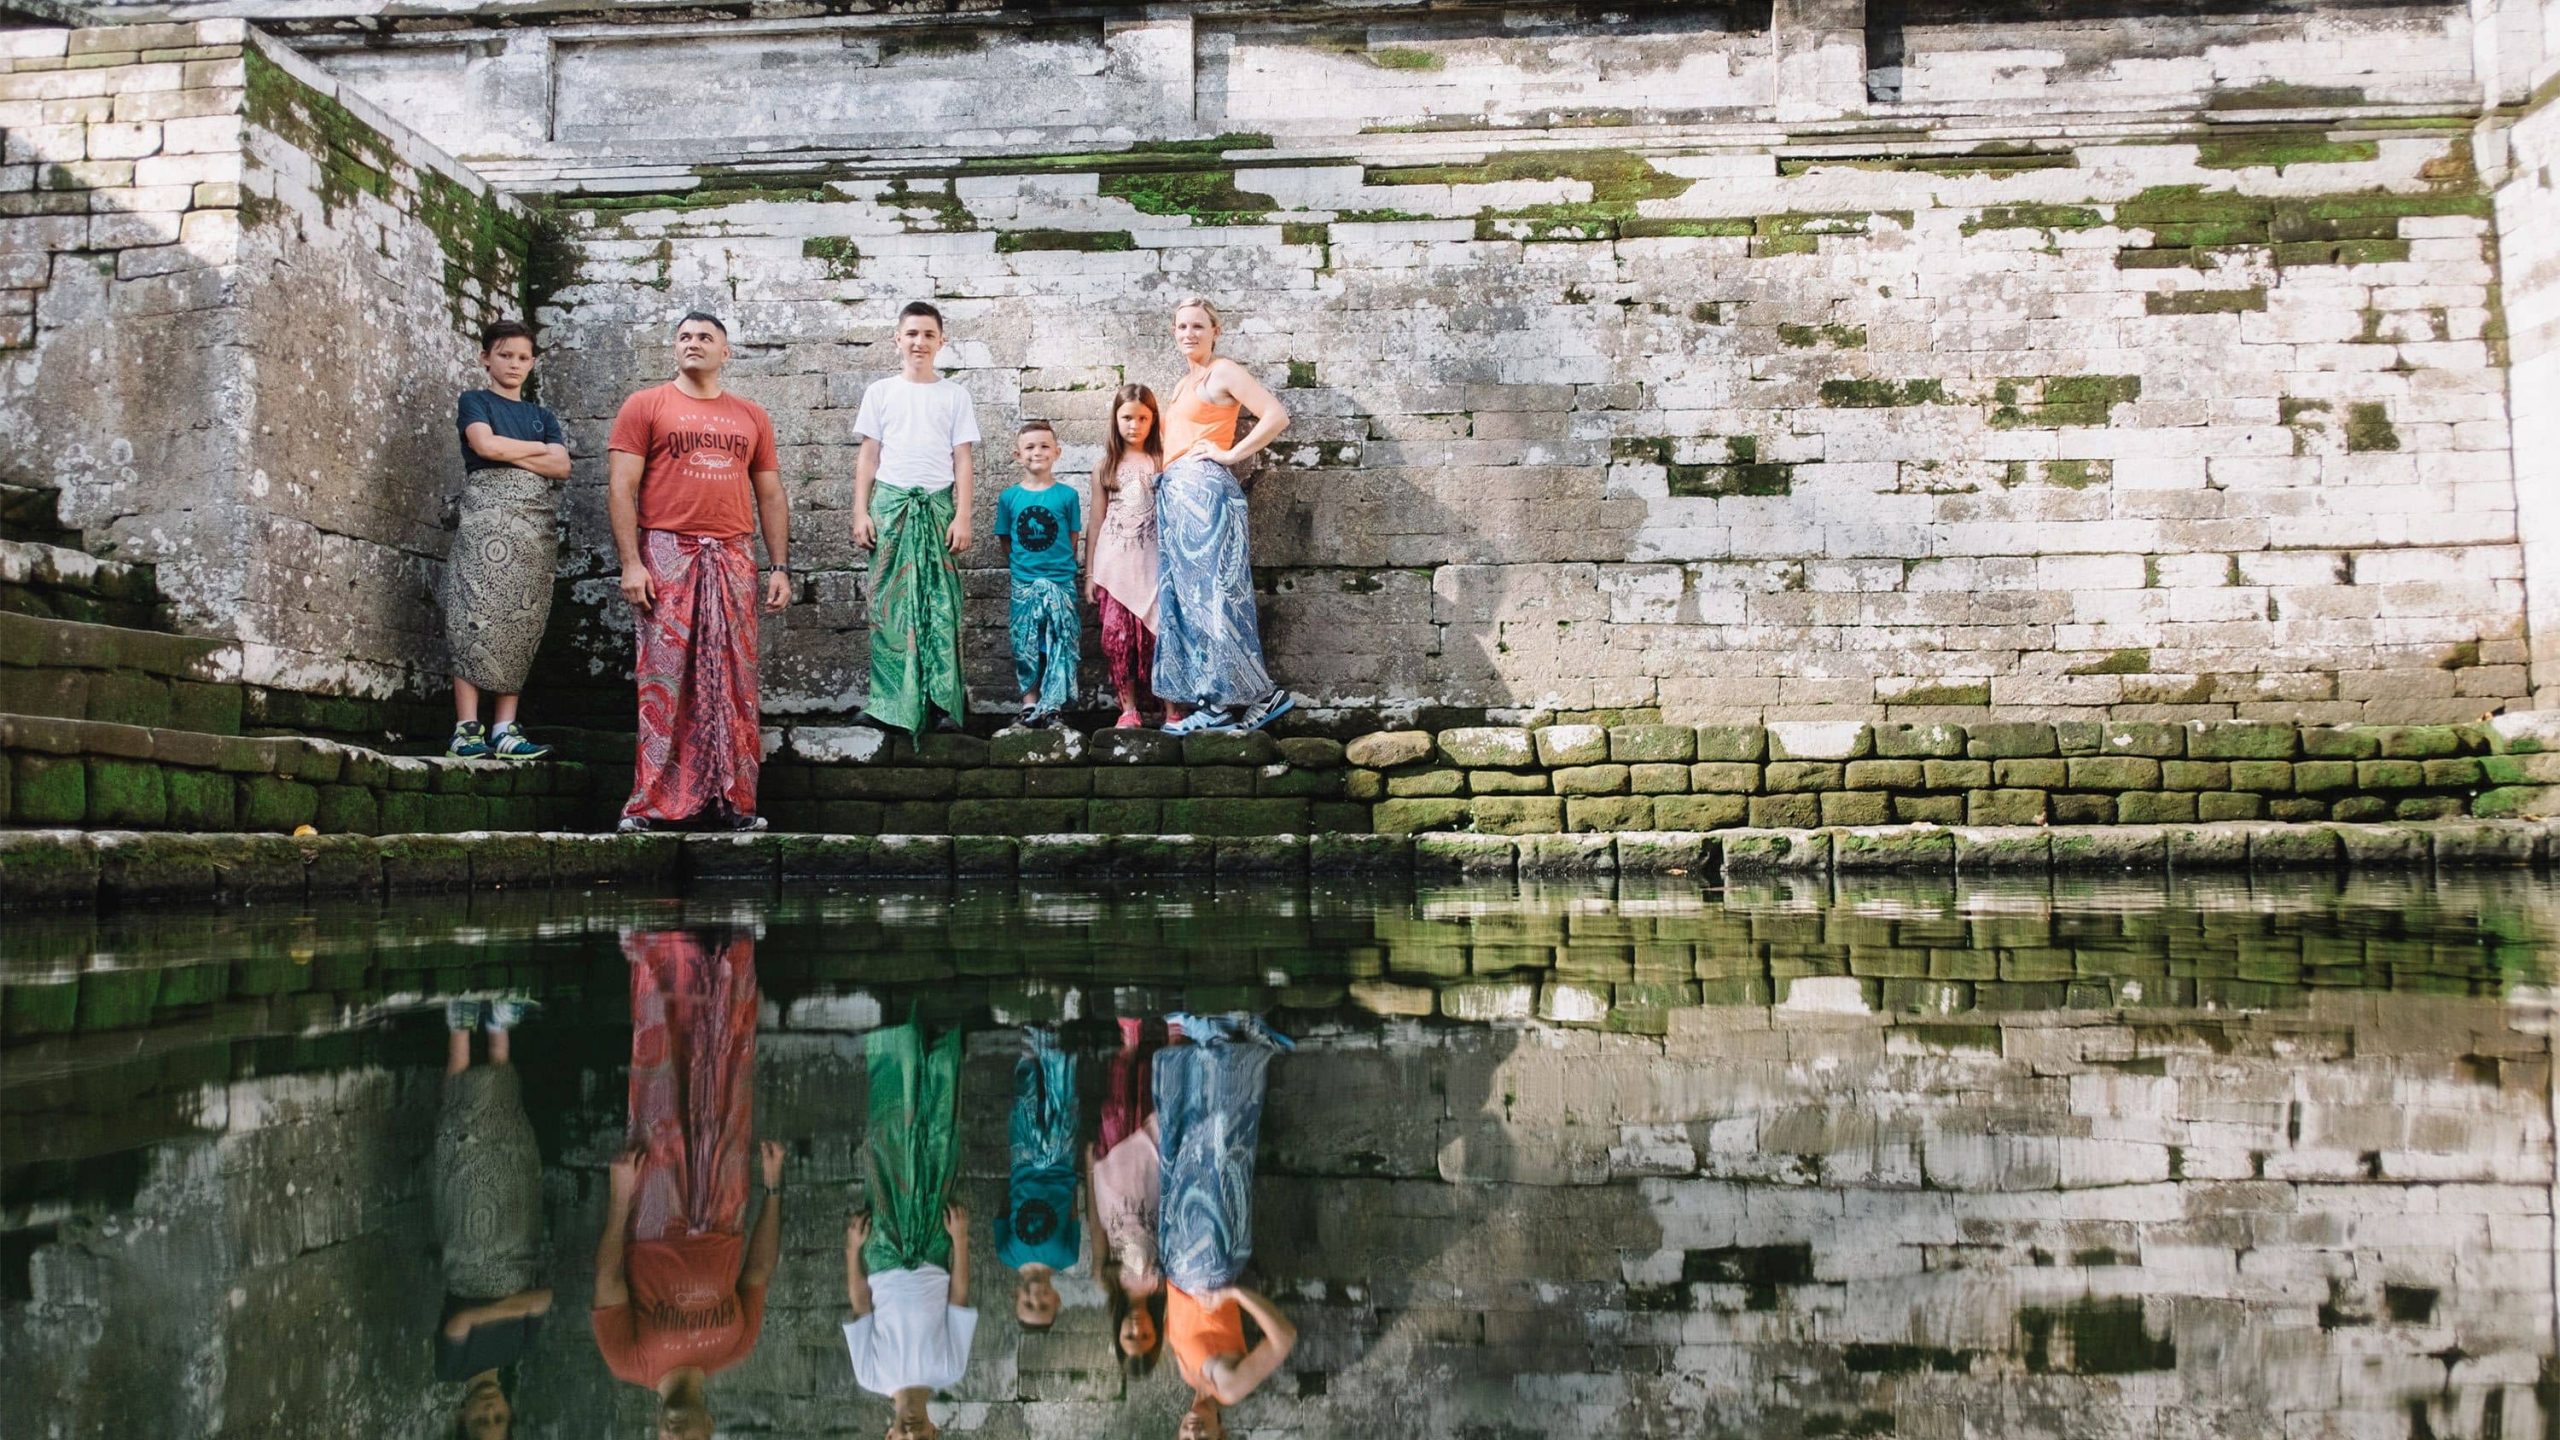 A family of six wearing batik print clothing posing for a photographer in front of a reflective pond in Bali